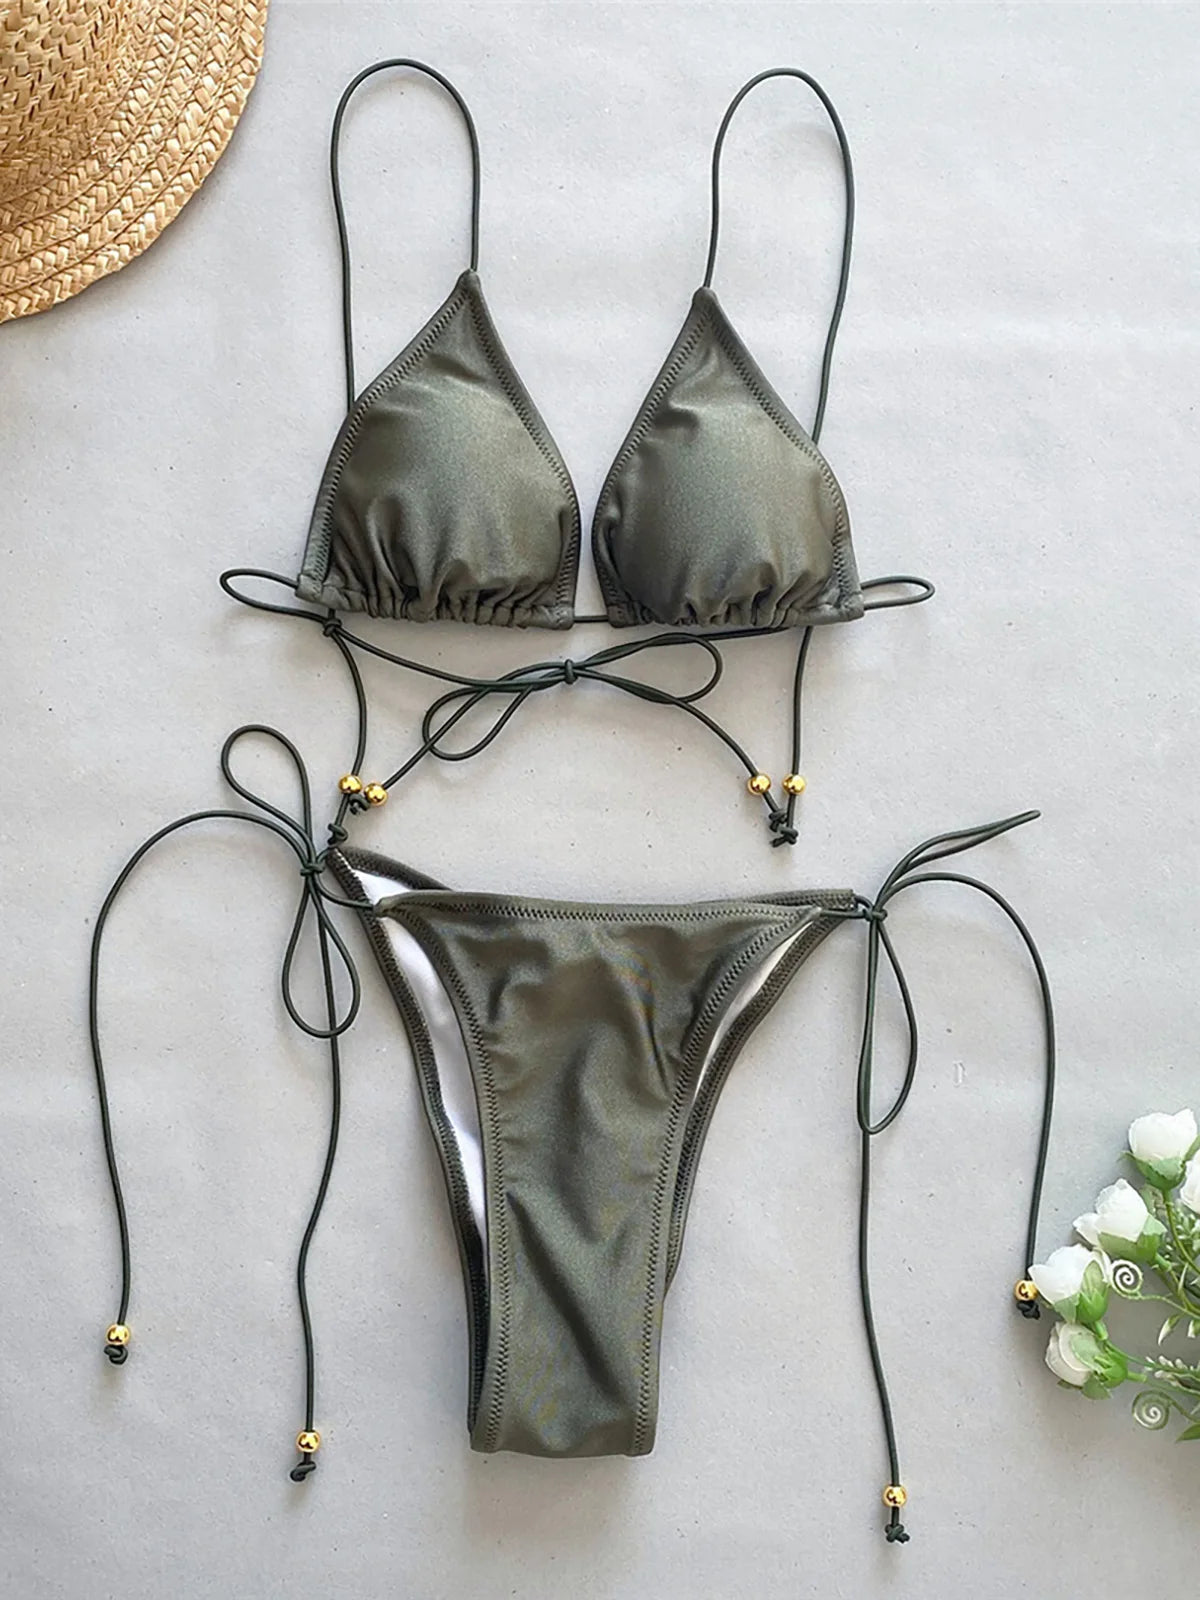 Strappy High Leg Cut Bikini in Army Green with Scrunch Butt Detail, Two Piece Swimwear Set, Made from Nylon and Spandex. Solid Pattern and True to Size. Sizes Available: S, M, L. Suited for Women aged 18-35 and Adults in general. Features Wire Free Support and Padding